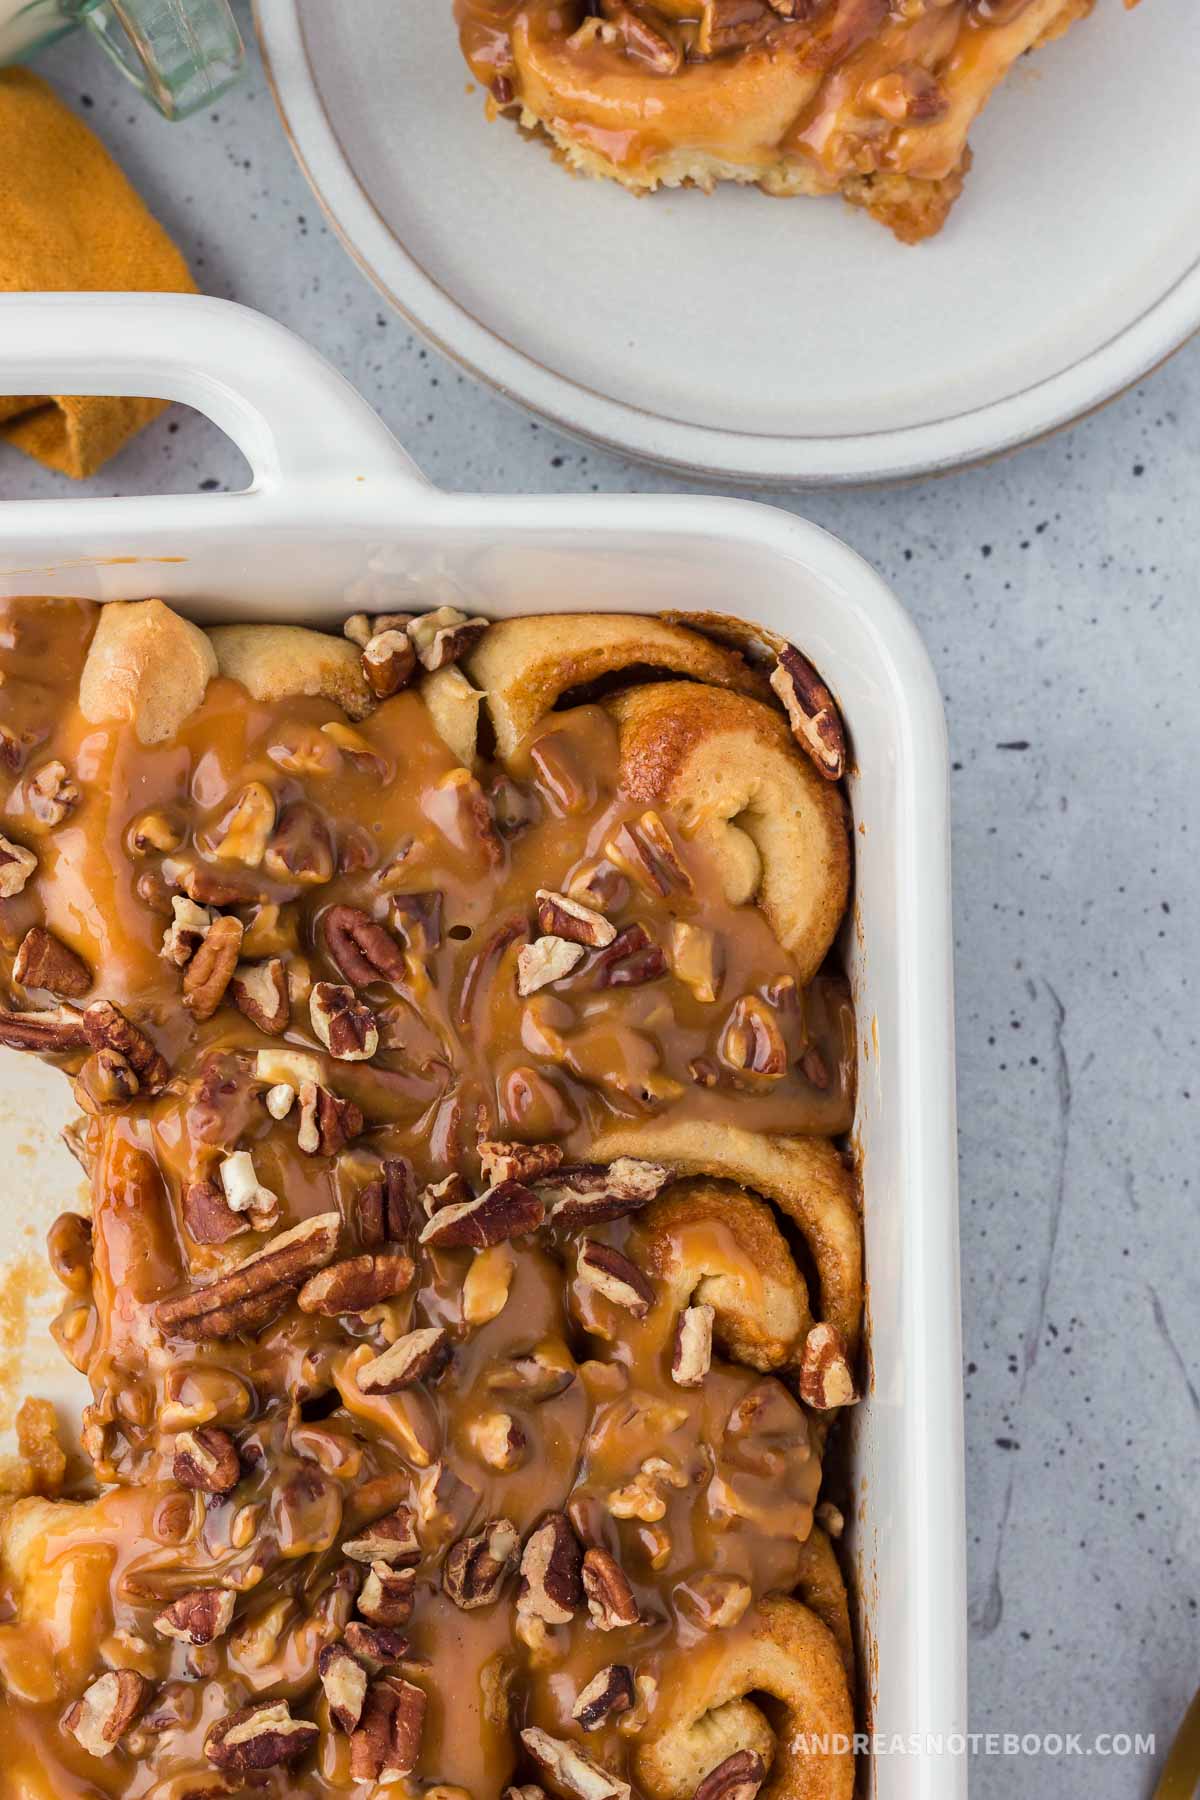 Pan of caramel covered cinnamon rolls in a baking dish.